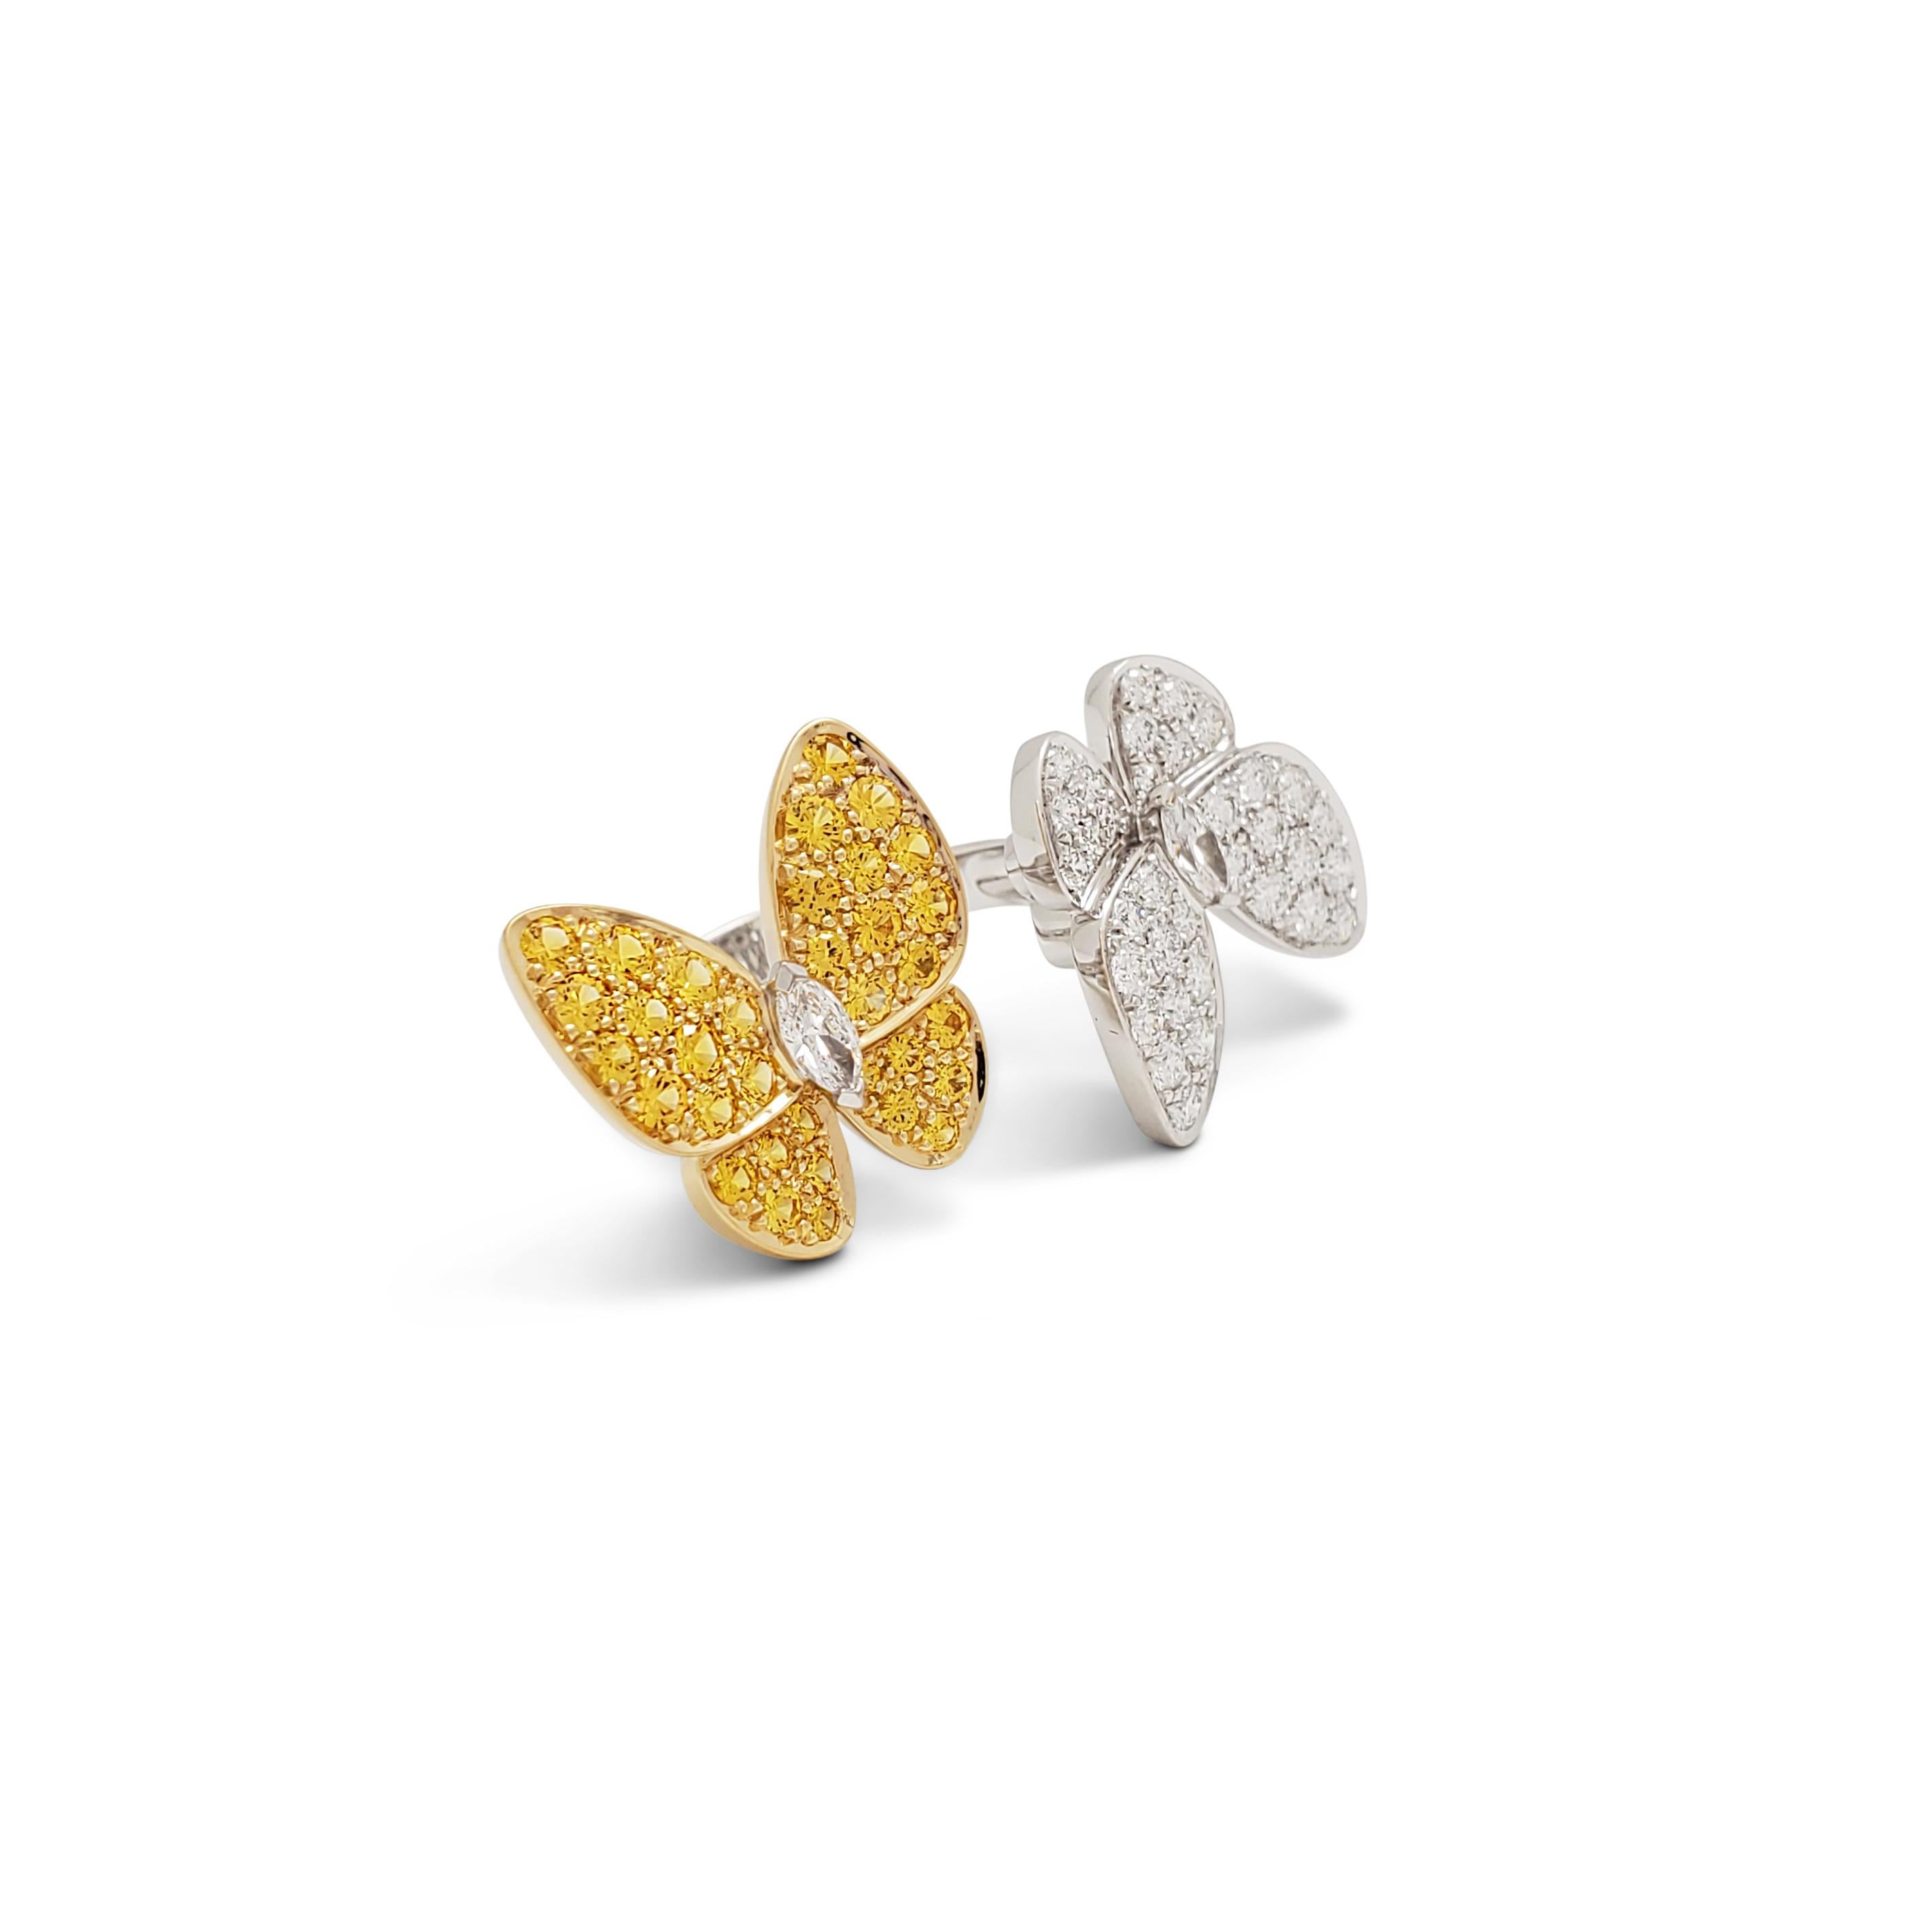 Authentic Van Cleef & Arpels 'Two Butterfly' between-the-finger ring crafted 18 karat white gold features two butterflies that combine color and asymmetry in a dazzling way. The ring is set with an estimated 0.99 carats of high-quality round and